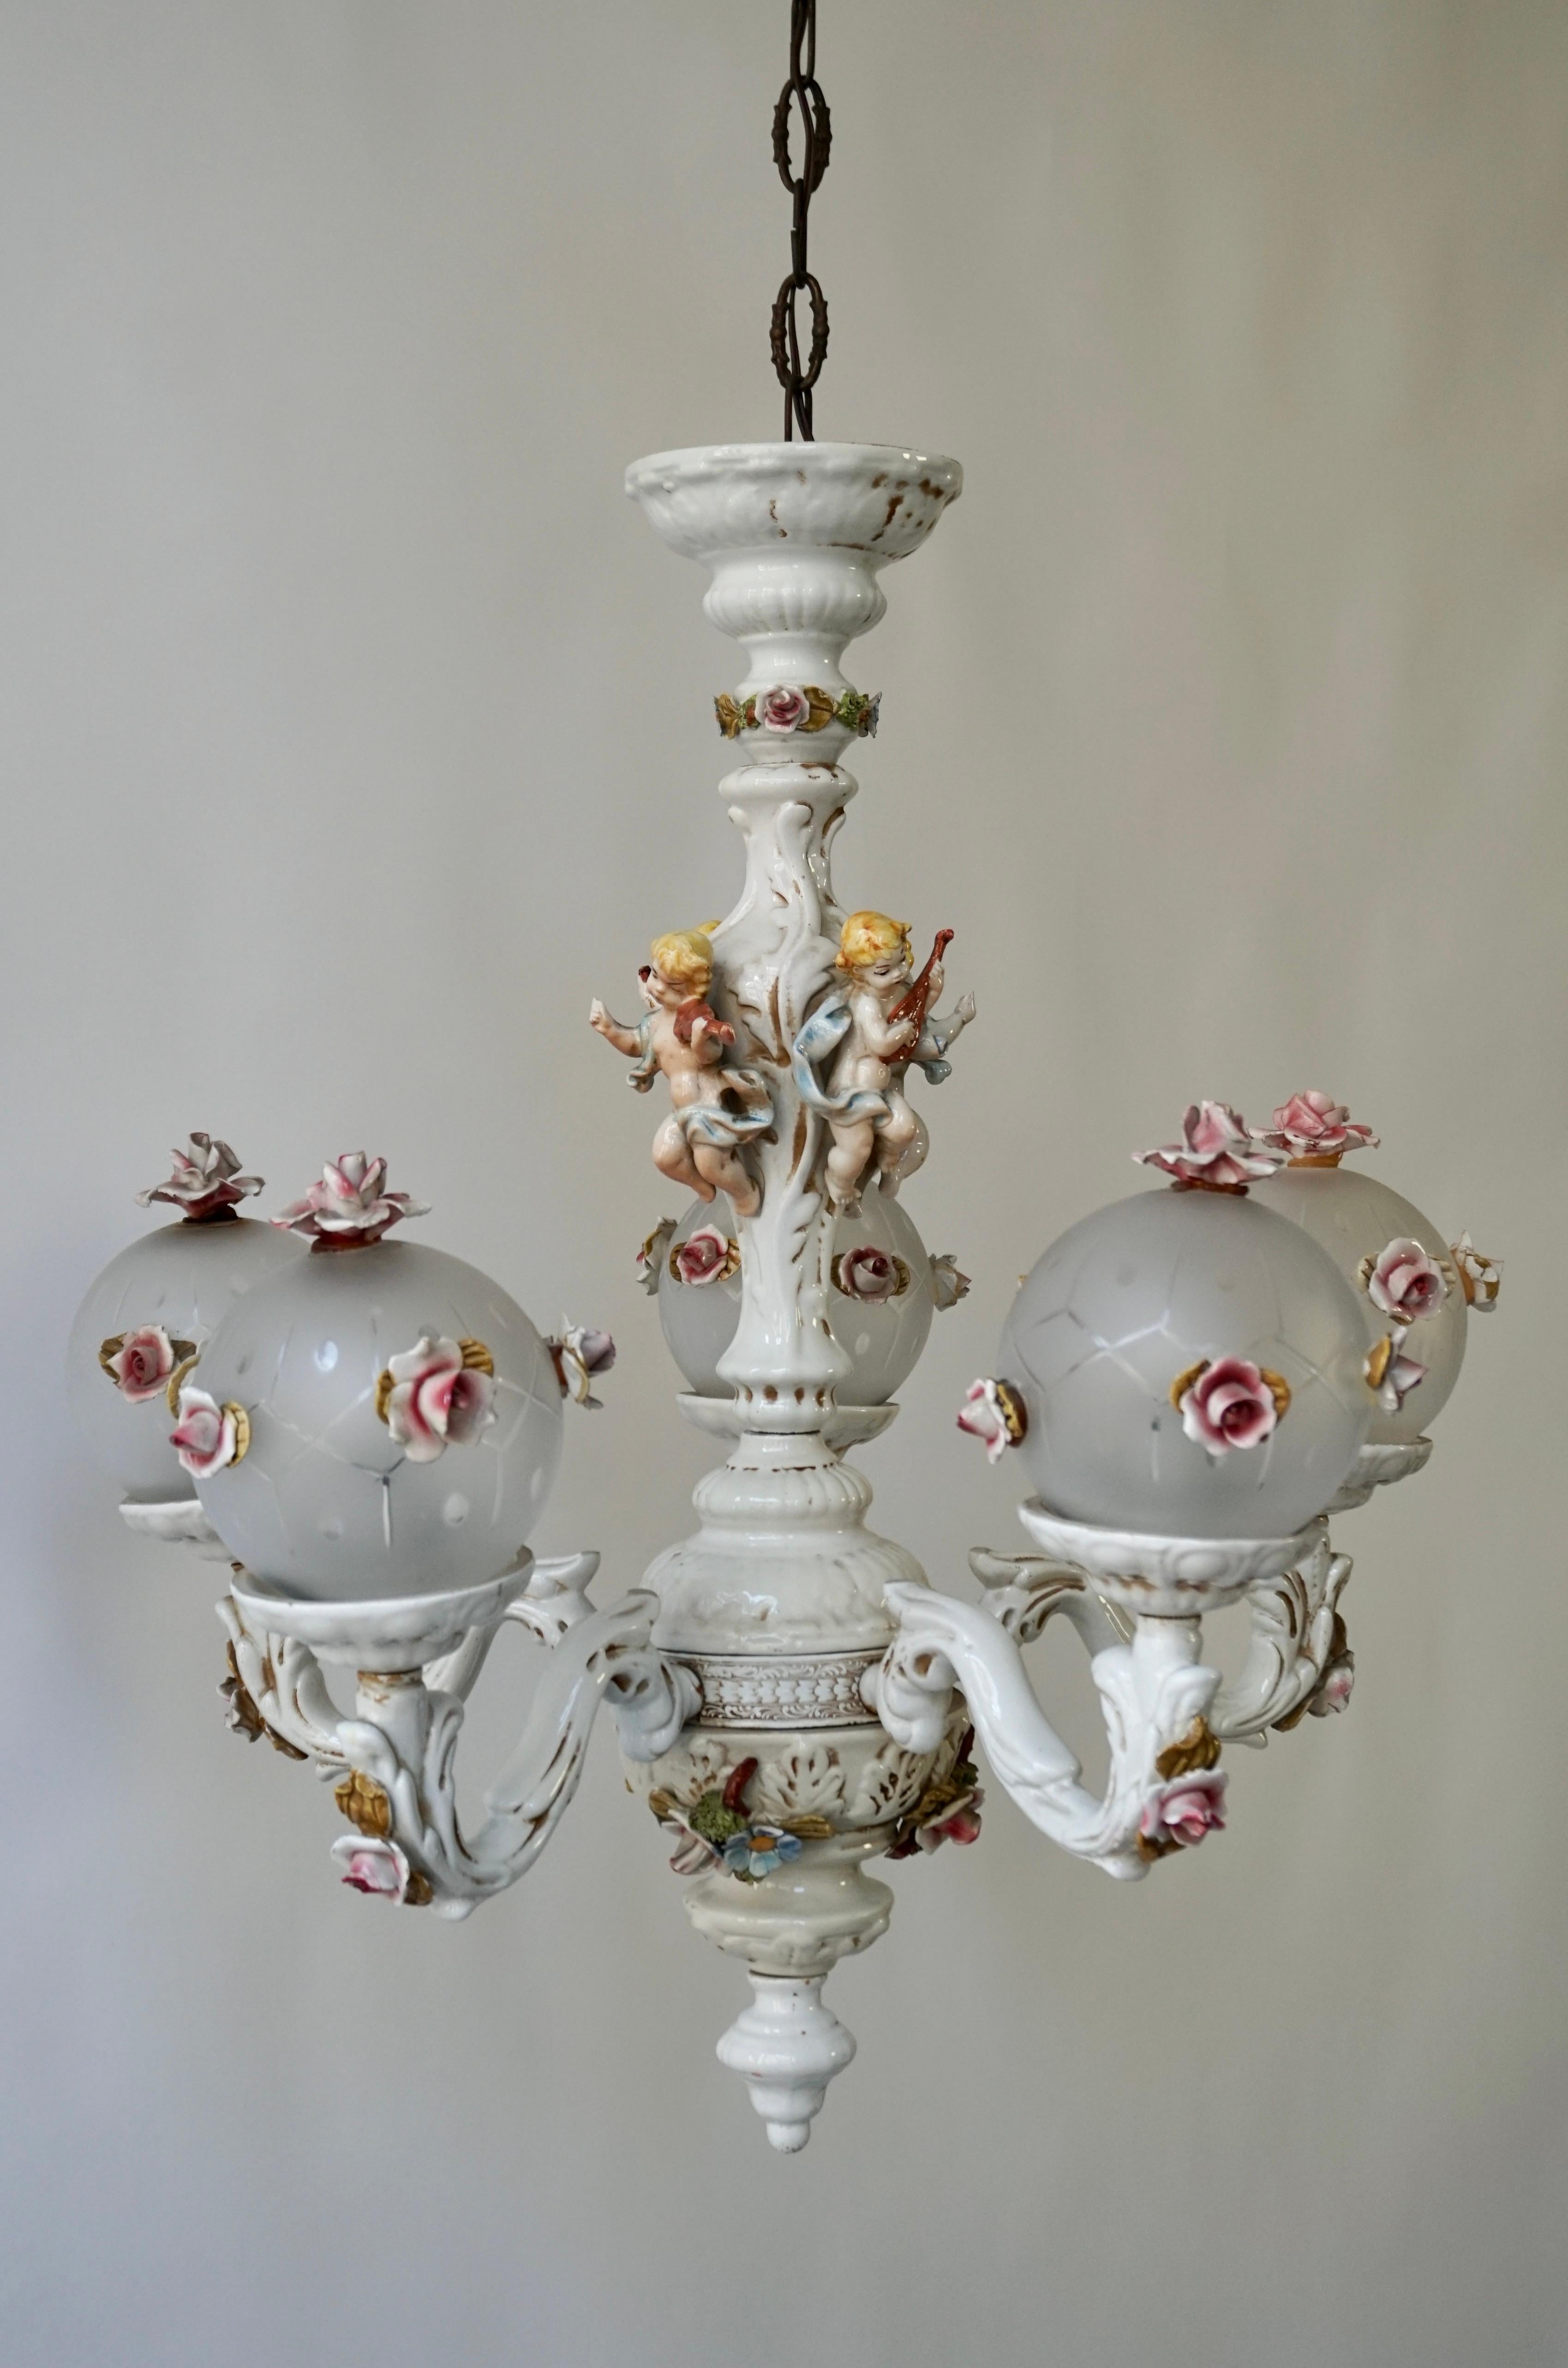 Gorgeous Italian porcelain chandelier with exquisite floral arrangements and five glass globes.

This magnificent chandelier is an exceptional example of the Rococo style.The chandelier features a shaped baluster-form stem and adorned with flowers